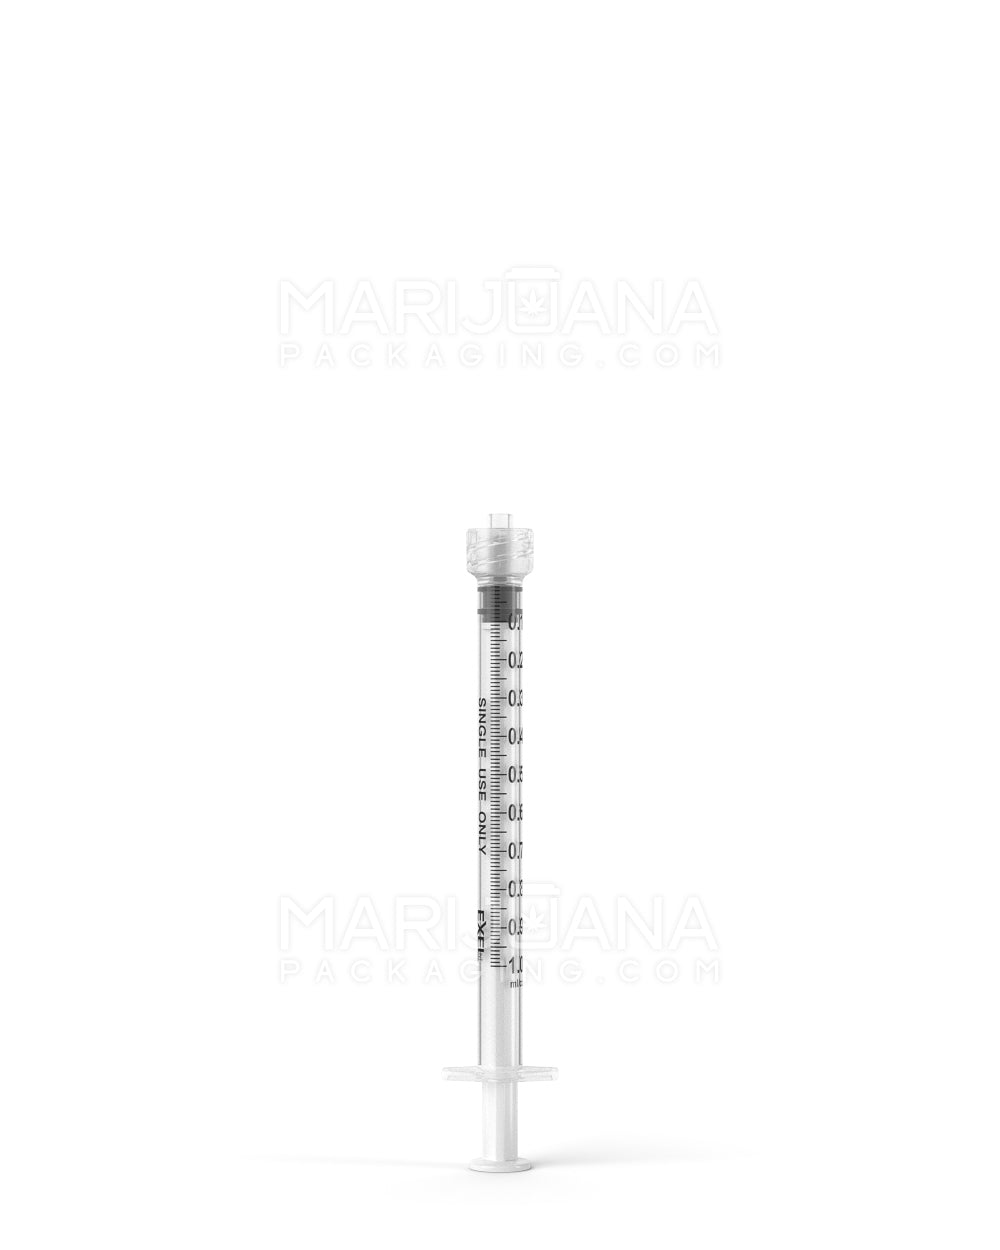 Luer Lock 1mL Plastic Dab Syringes with 0.1mL Increments